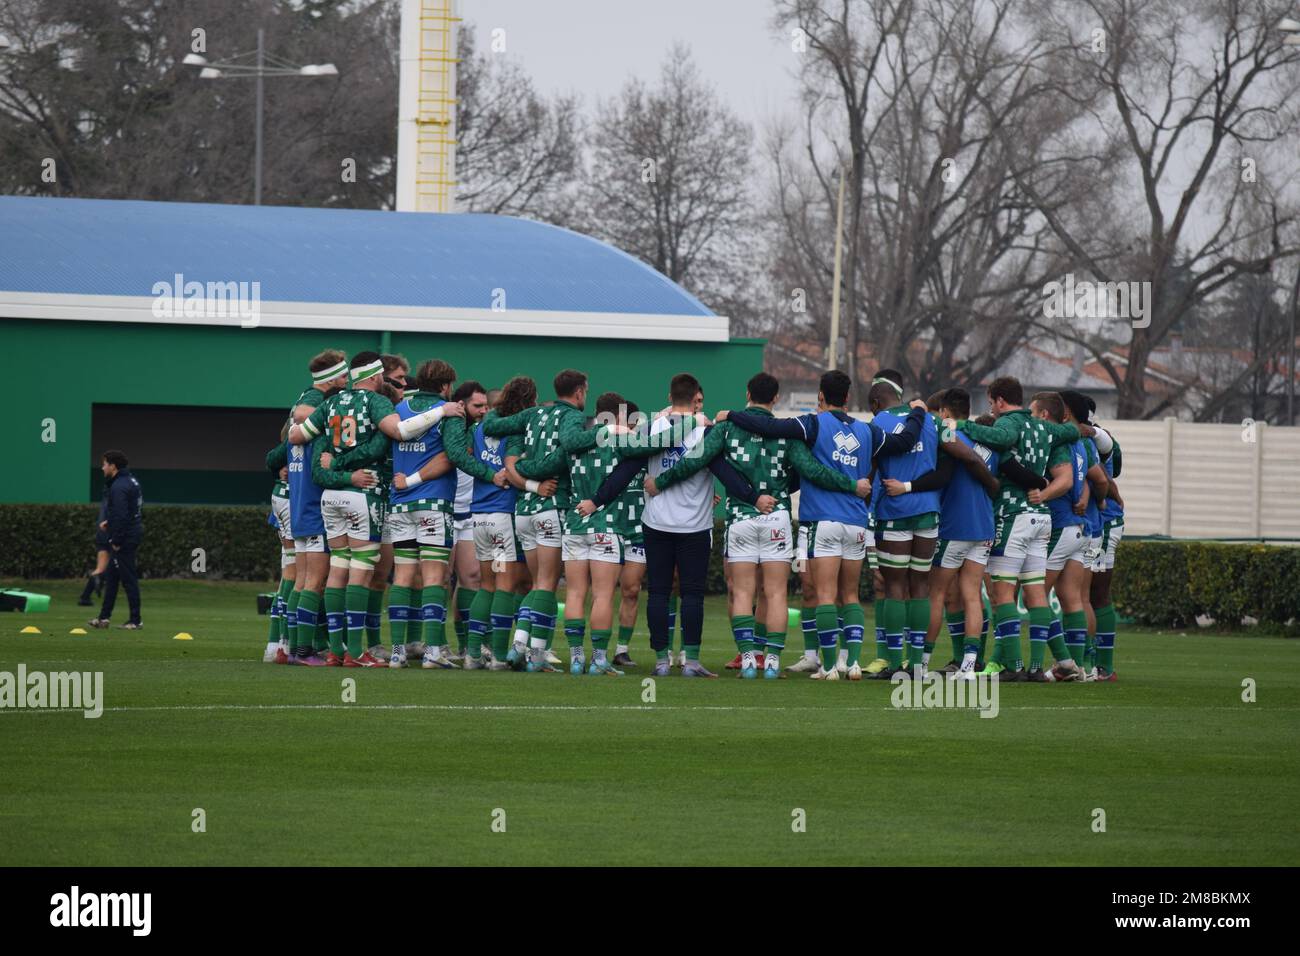 Benetton Rugby teamtalk, during the warmup before the United Rugby Championship game, against Ulster, in January 2023. Stock Photo